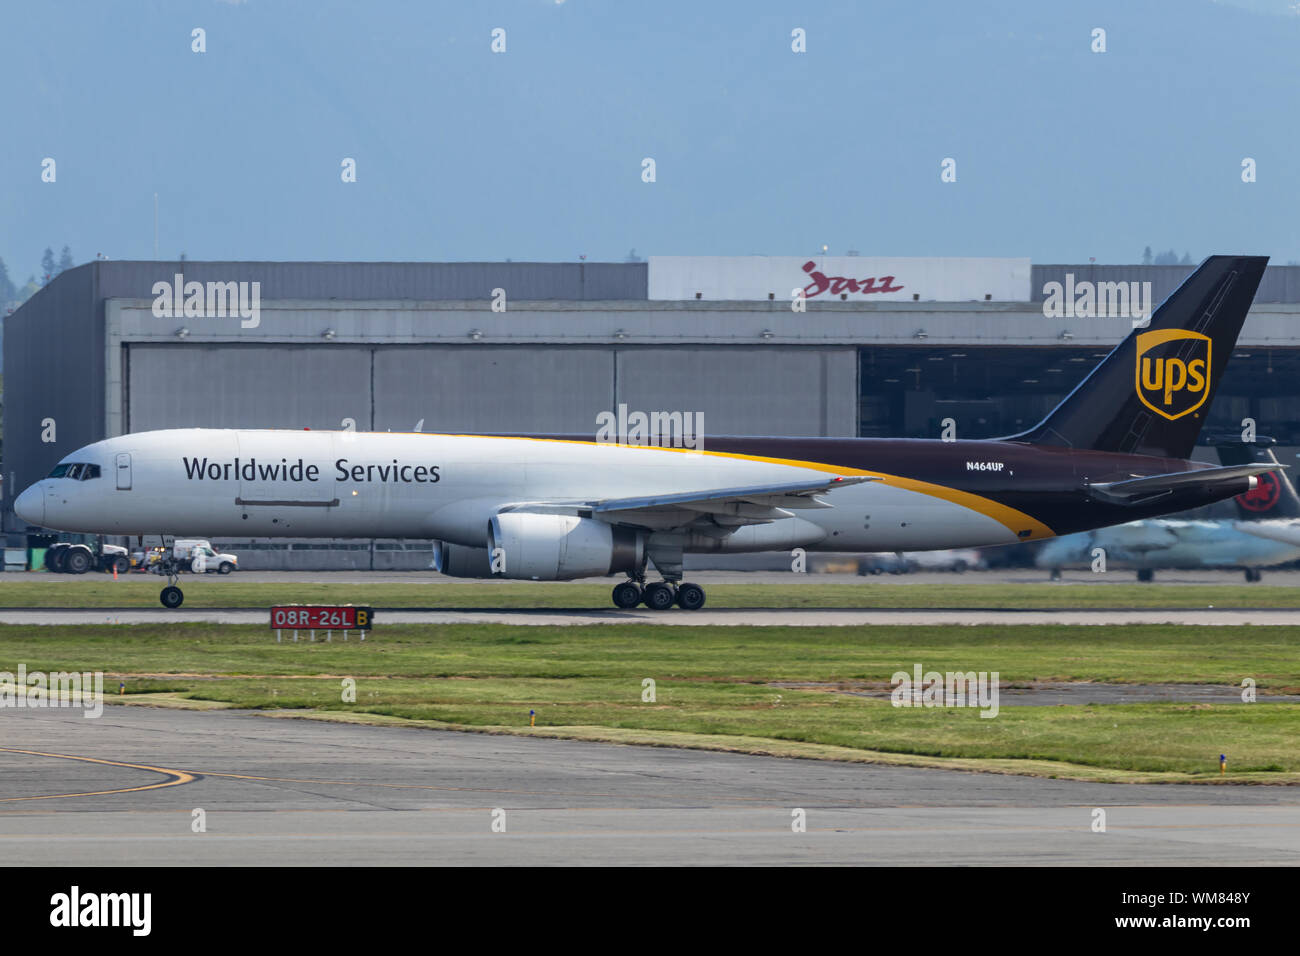 UPS Airlines Boeing 757F taking off from Vancouver Intl. Airport on a sunny day. Stock Photo